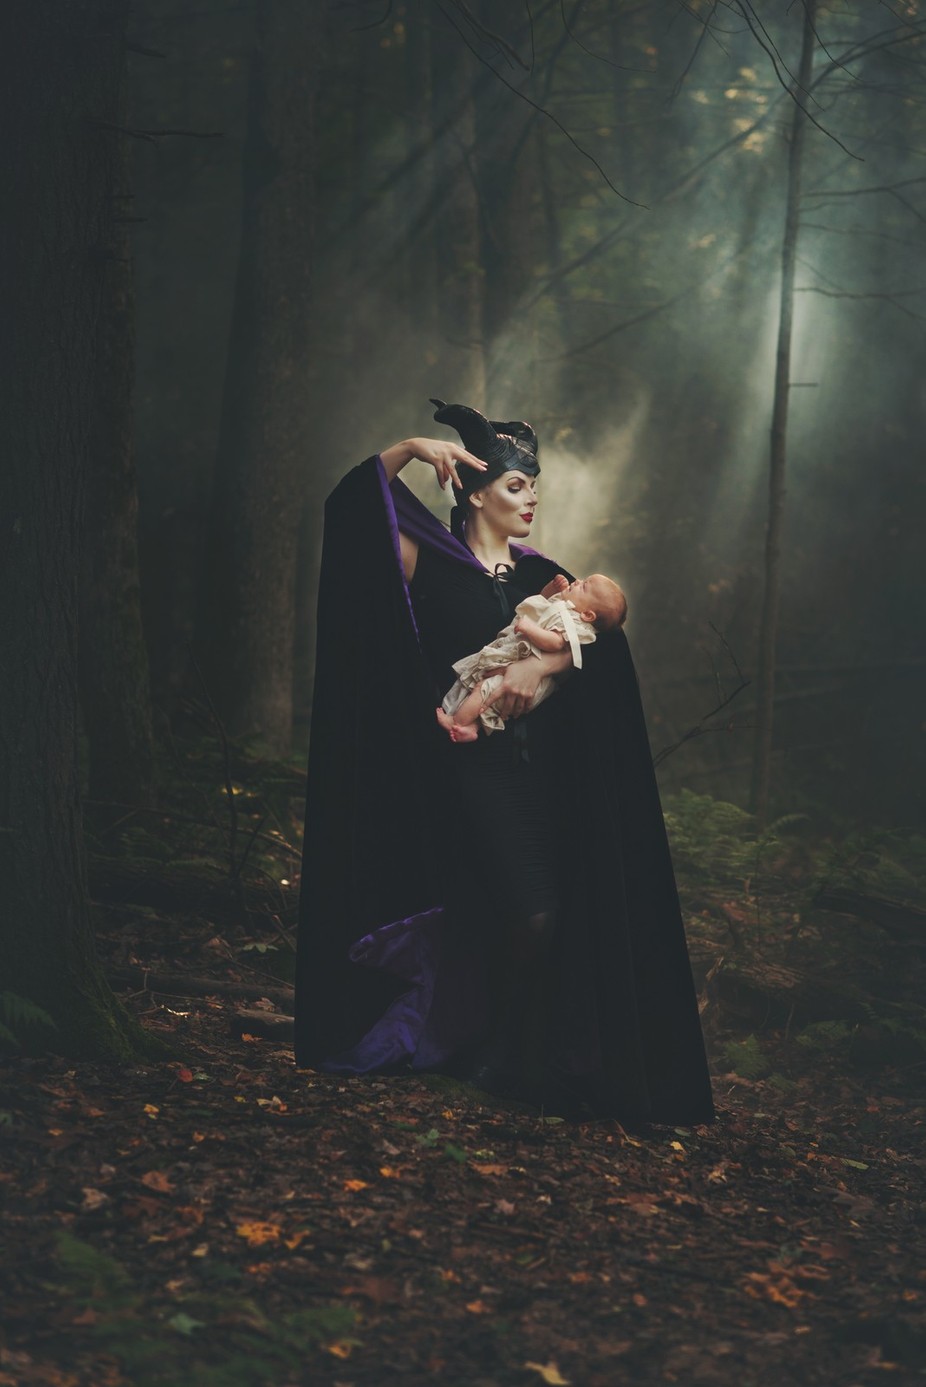 Casting the spell (Maleficent) by Andreamartinphoto - A Fantasy World Photo Contest